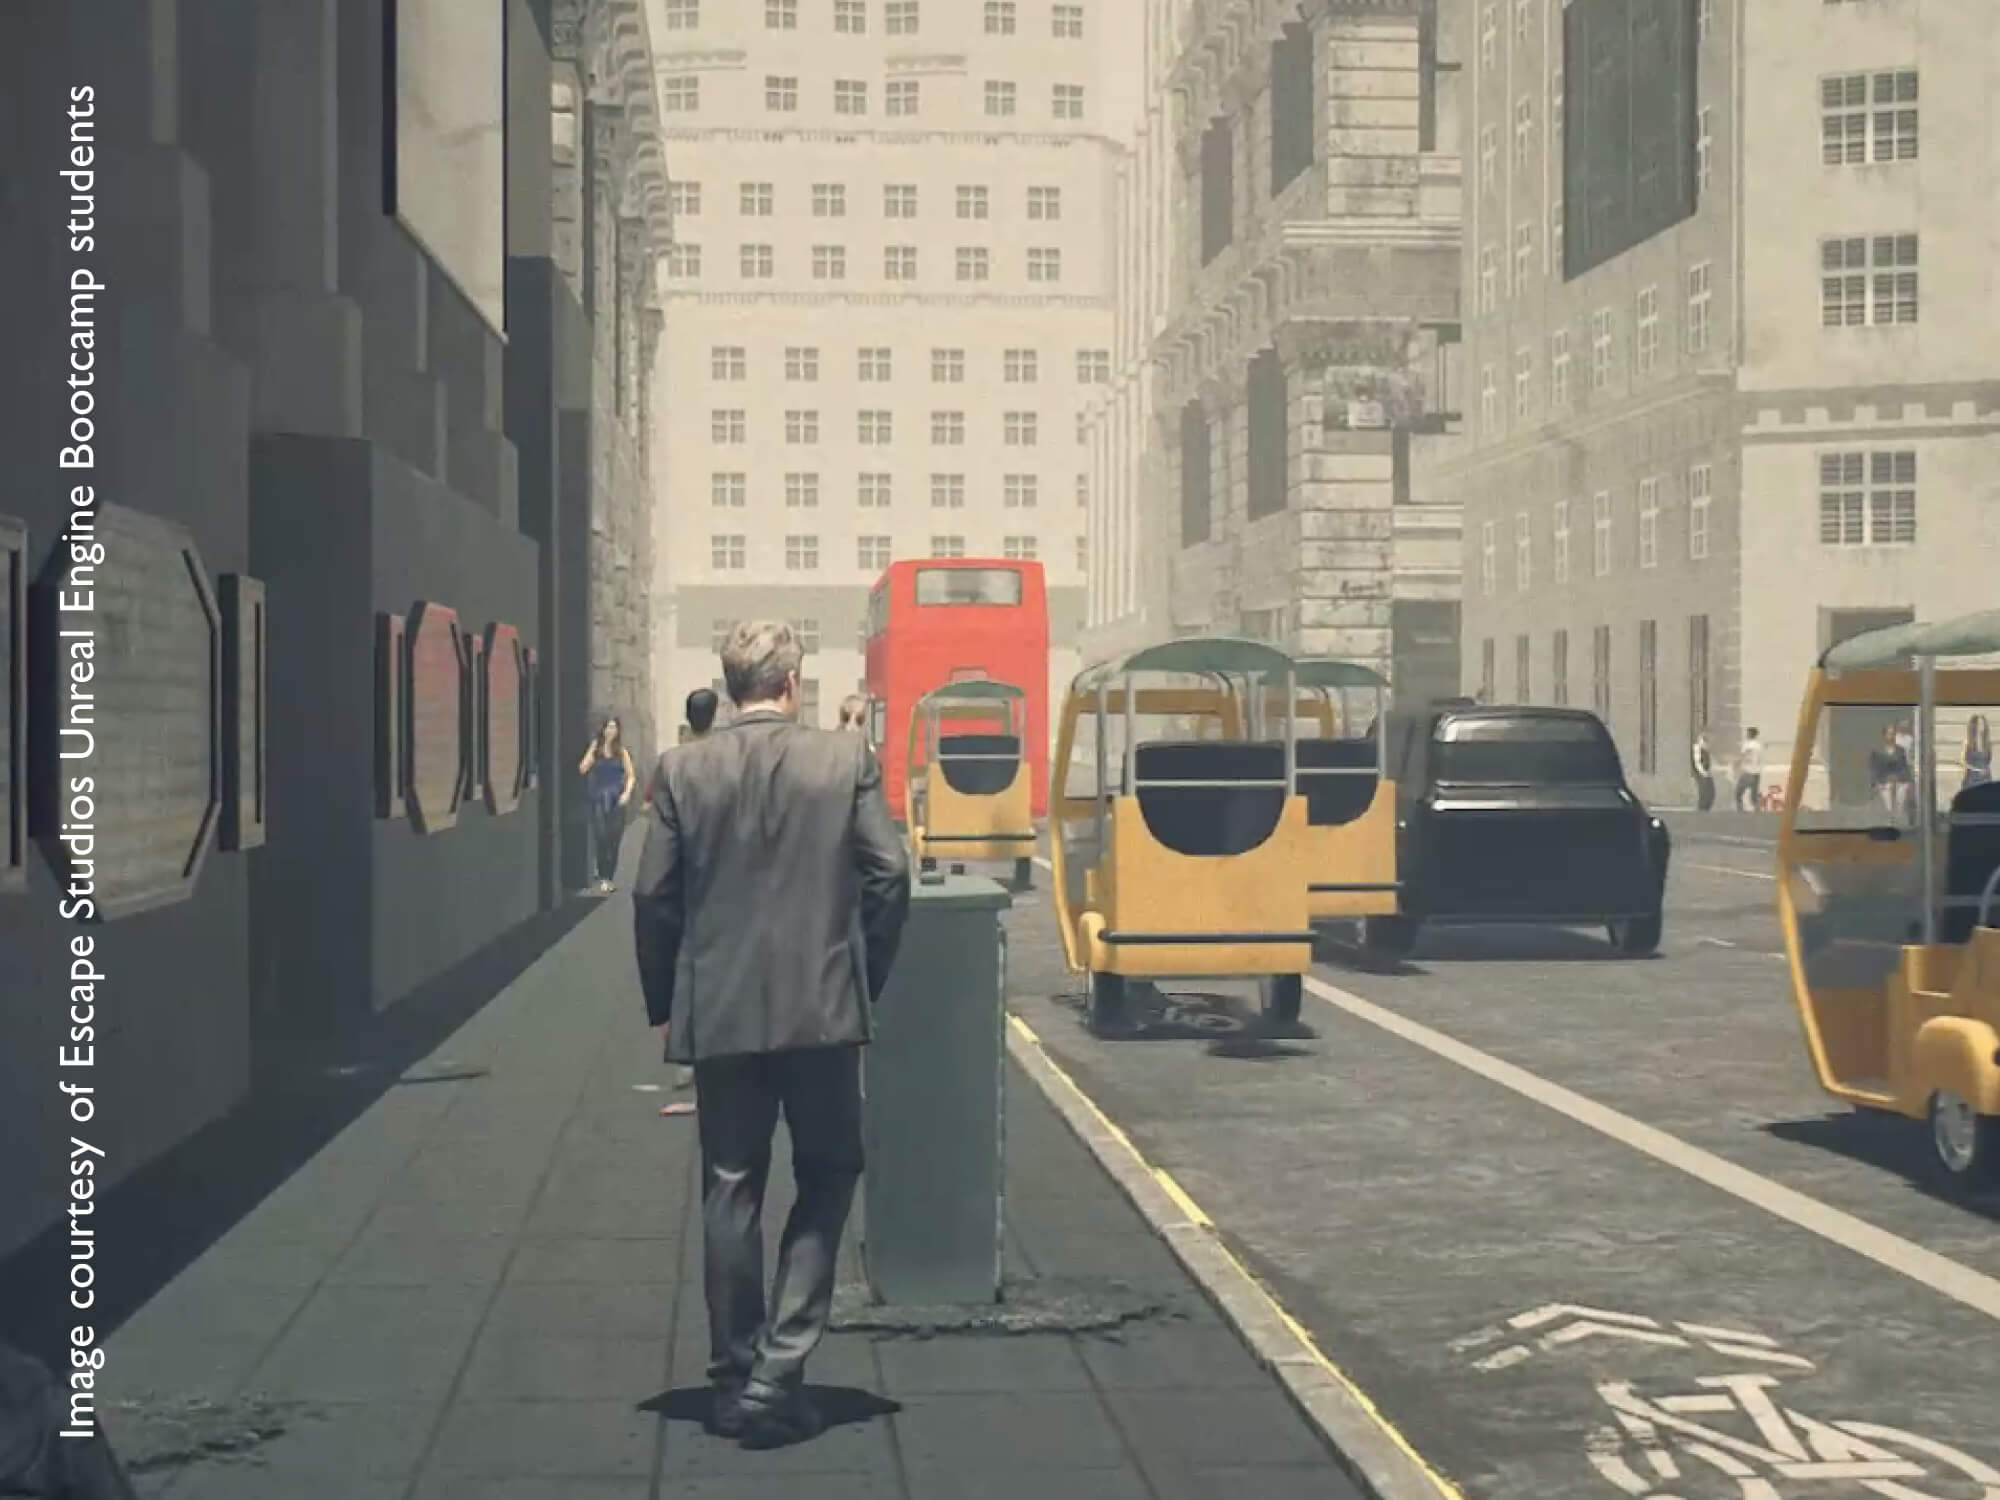 Cartoon image of a man walking through a city alongside a busy road with trams and buses